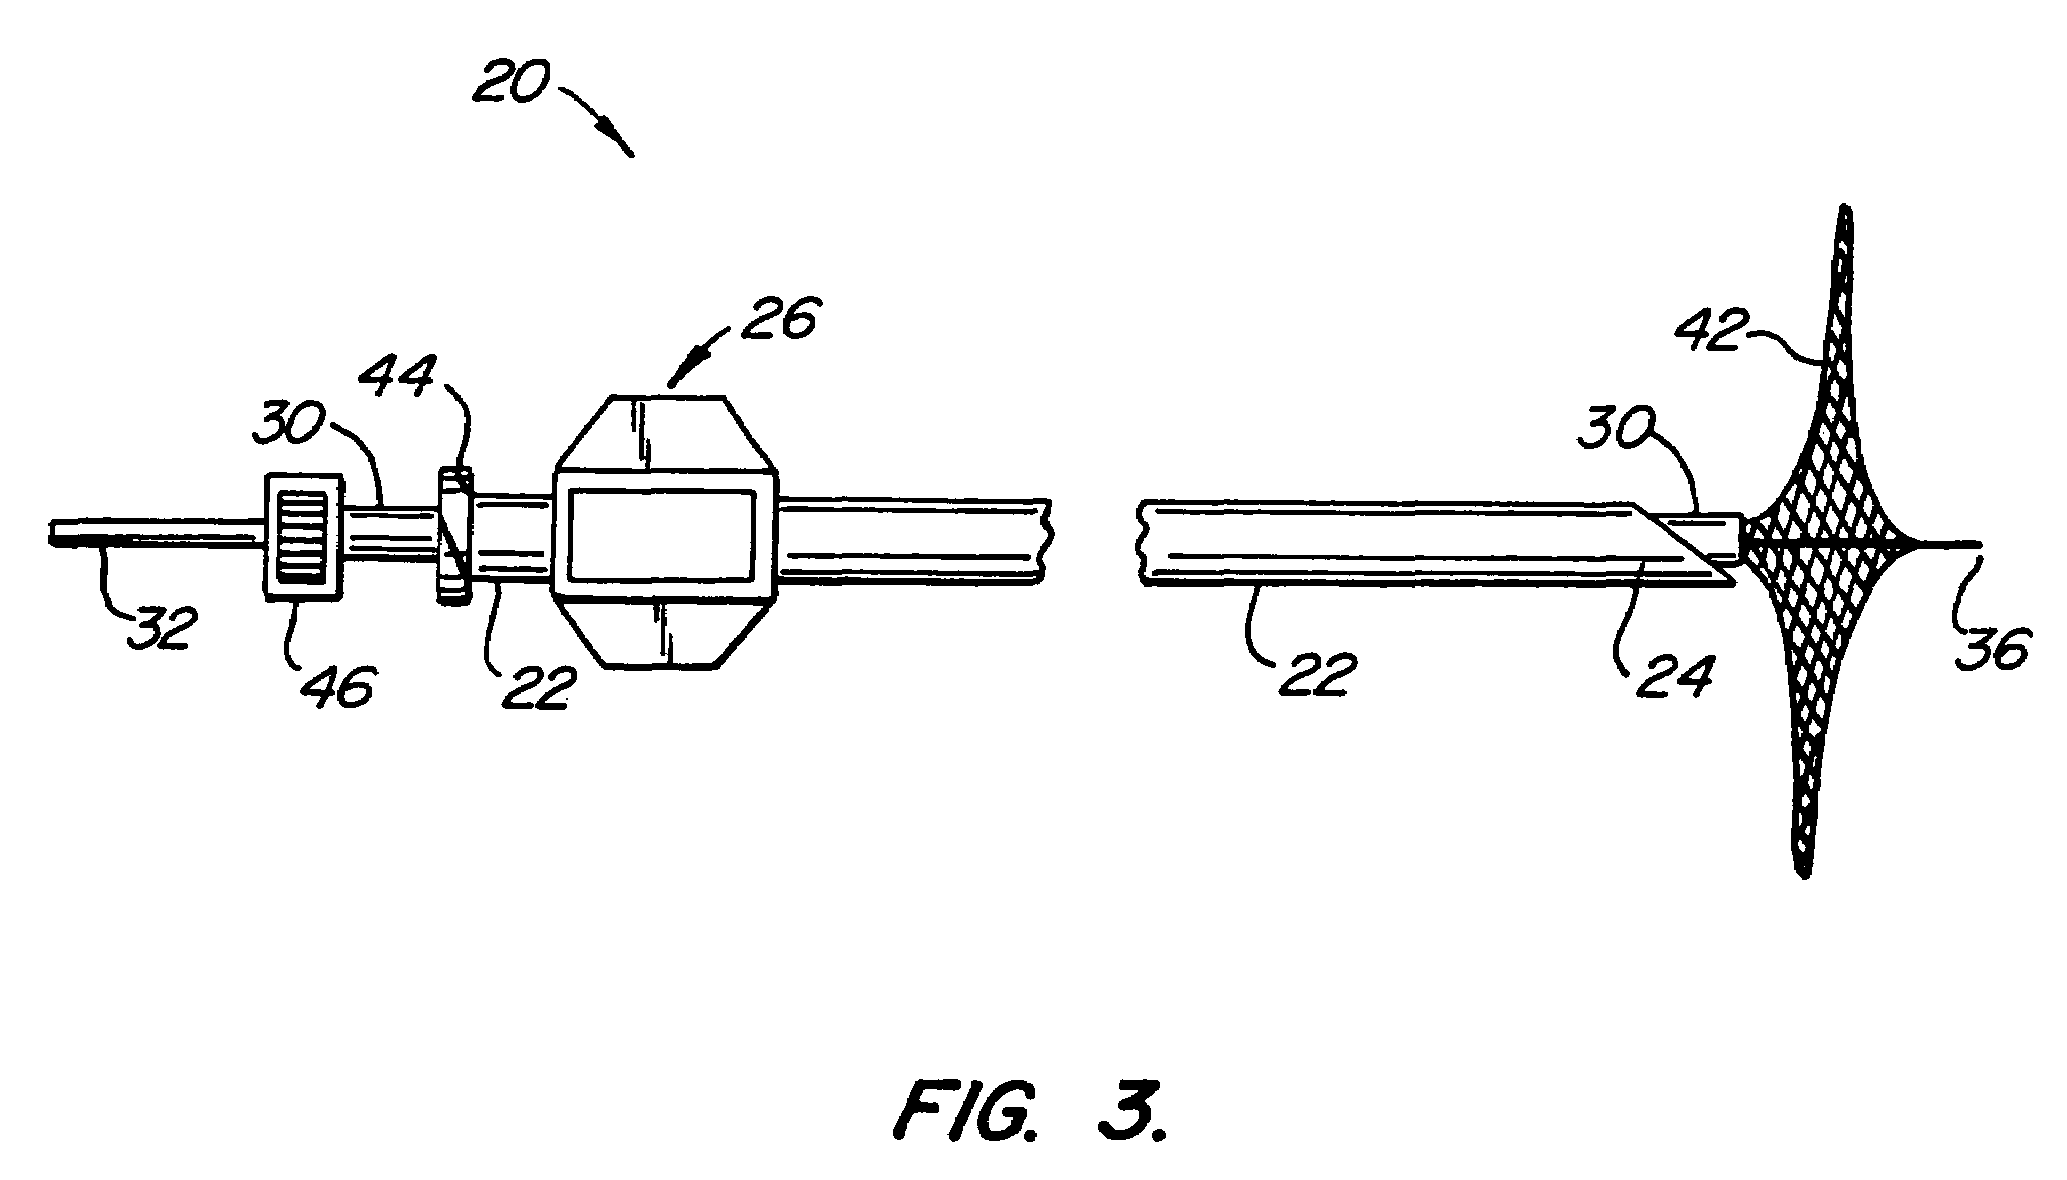 Target tissue localization device